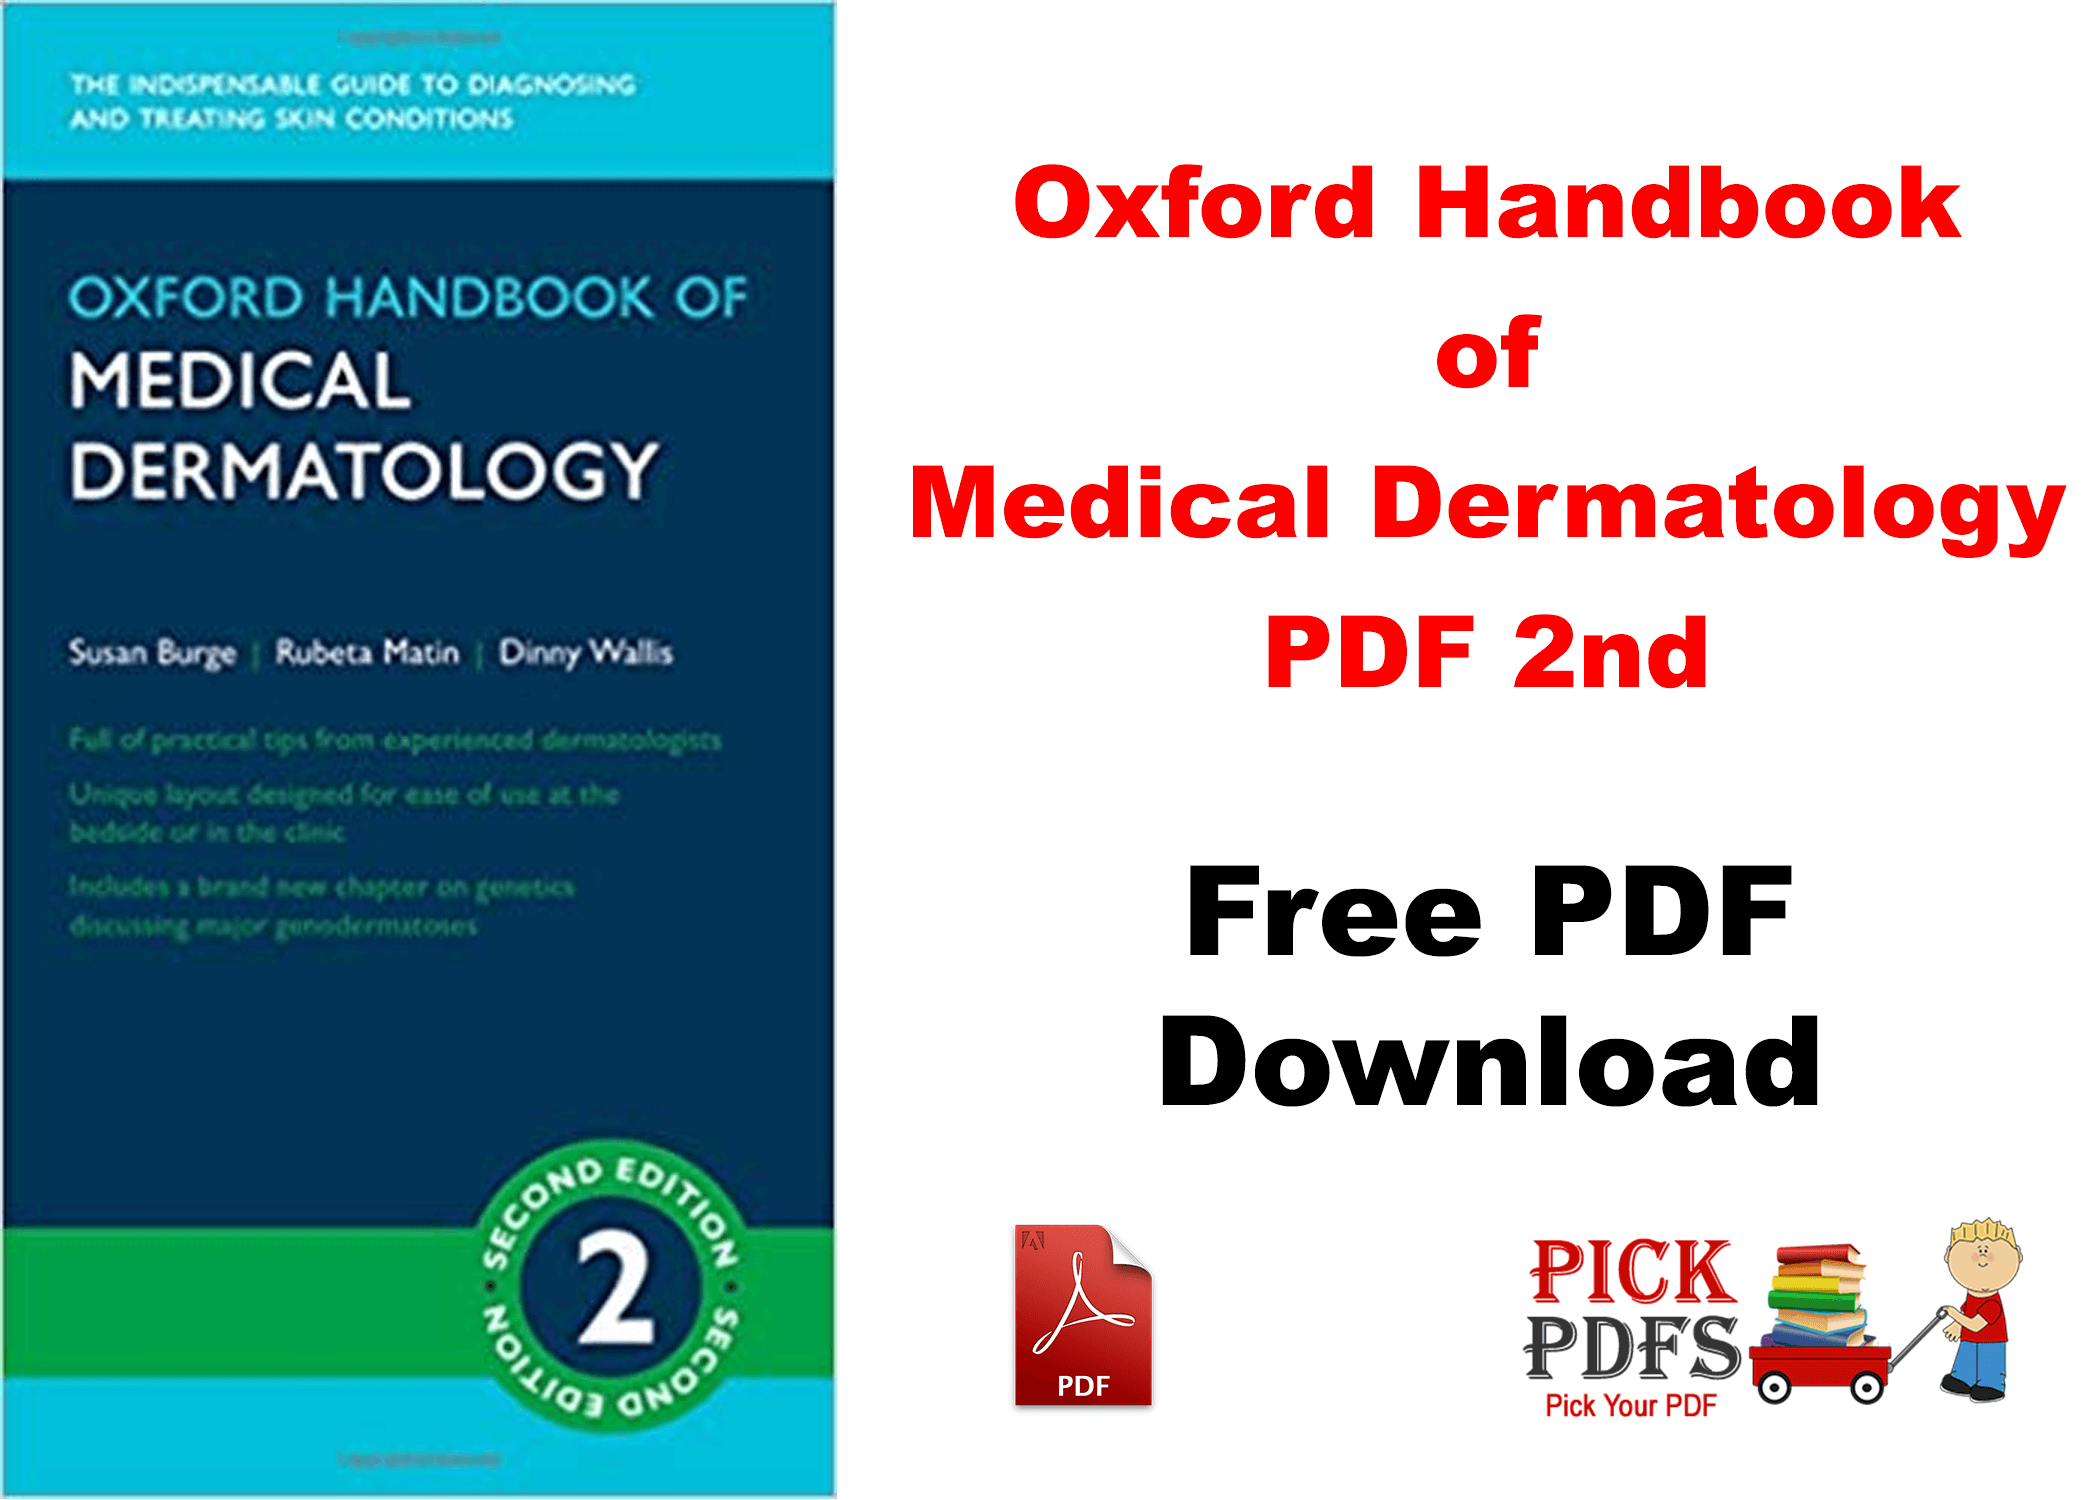 https://pickpdfs.com/free-pdf-download-abc-of-clinical-haematology/